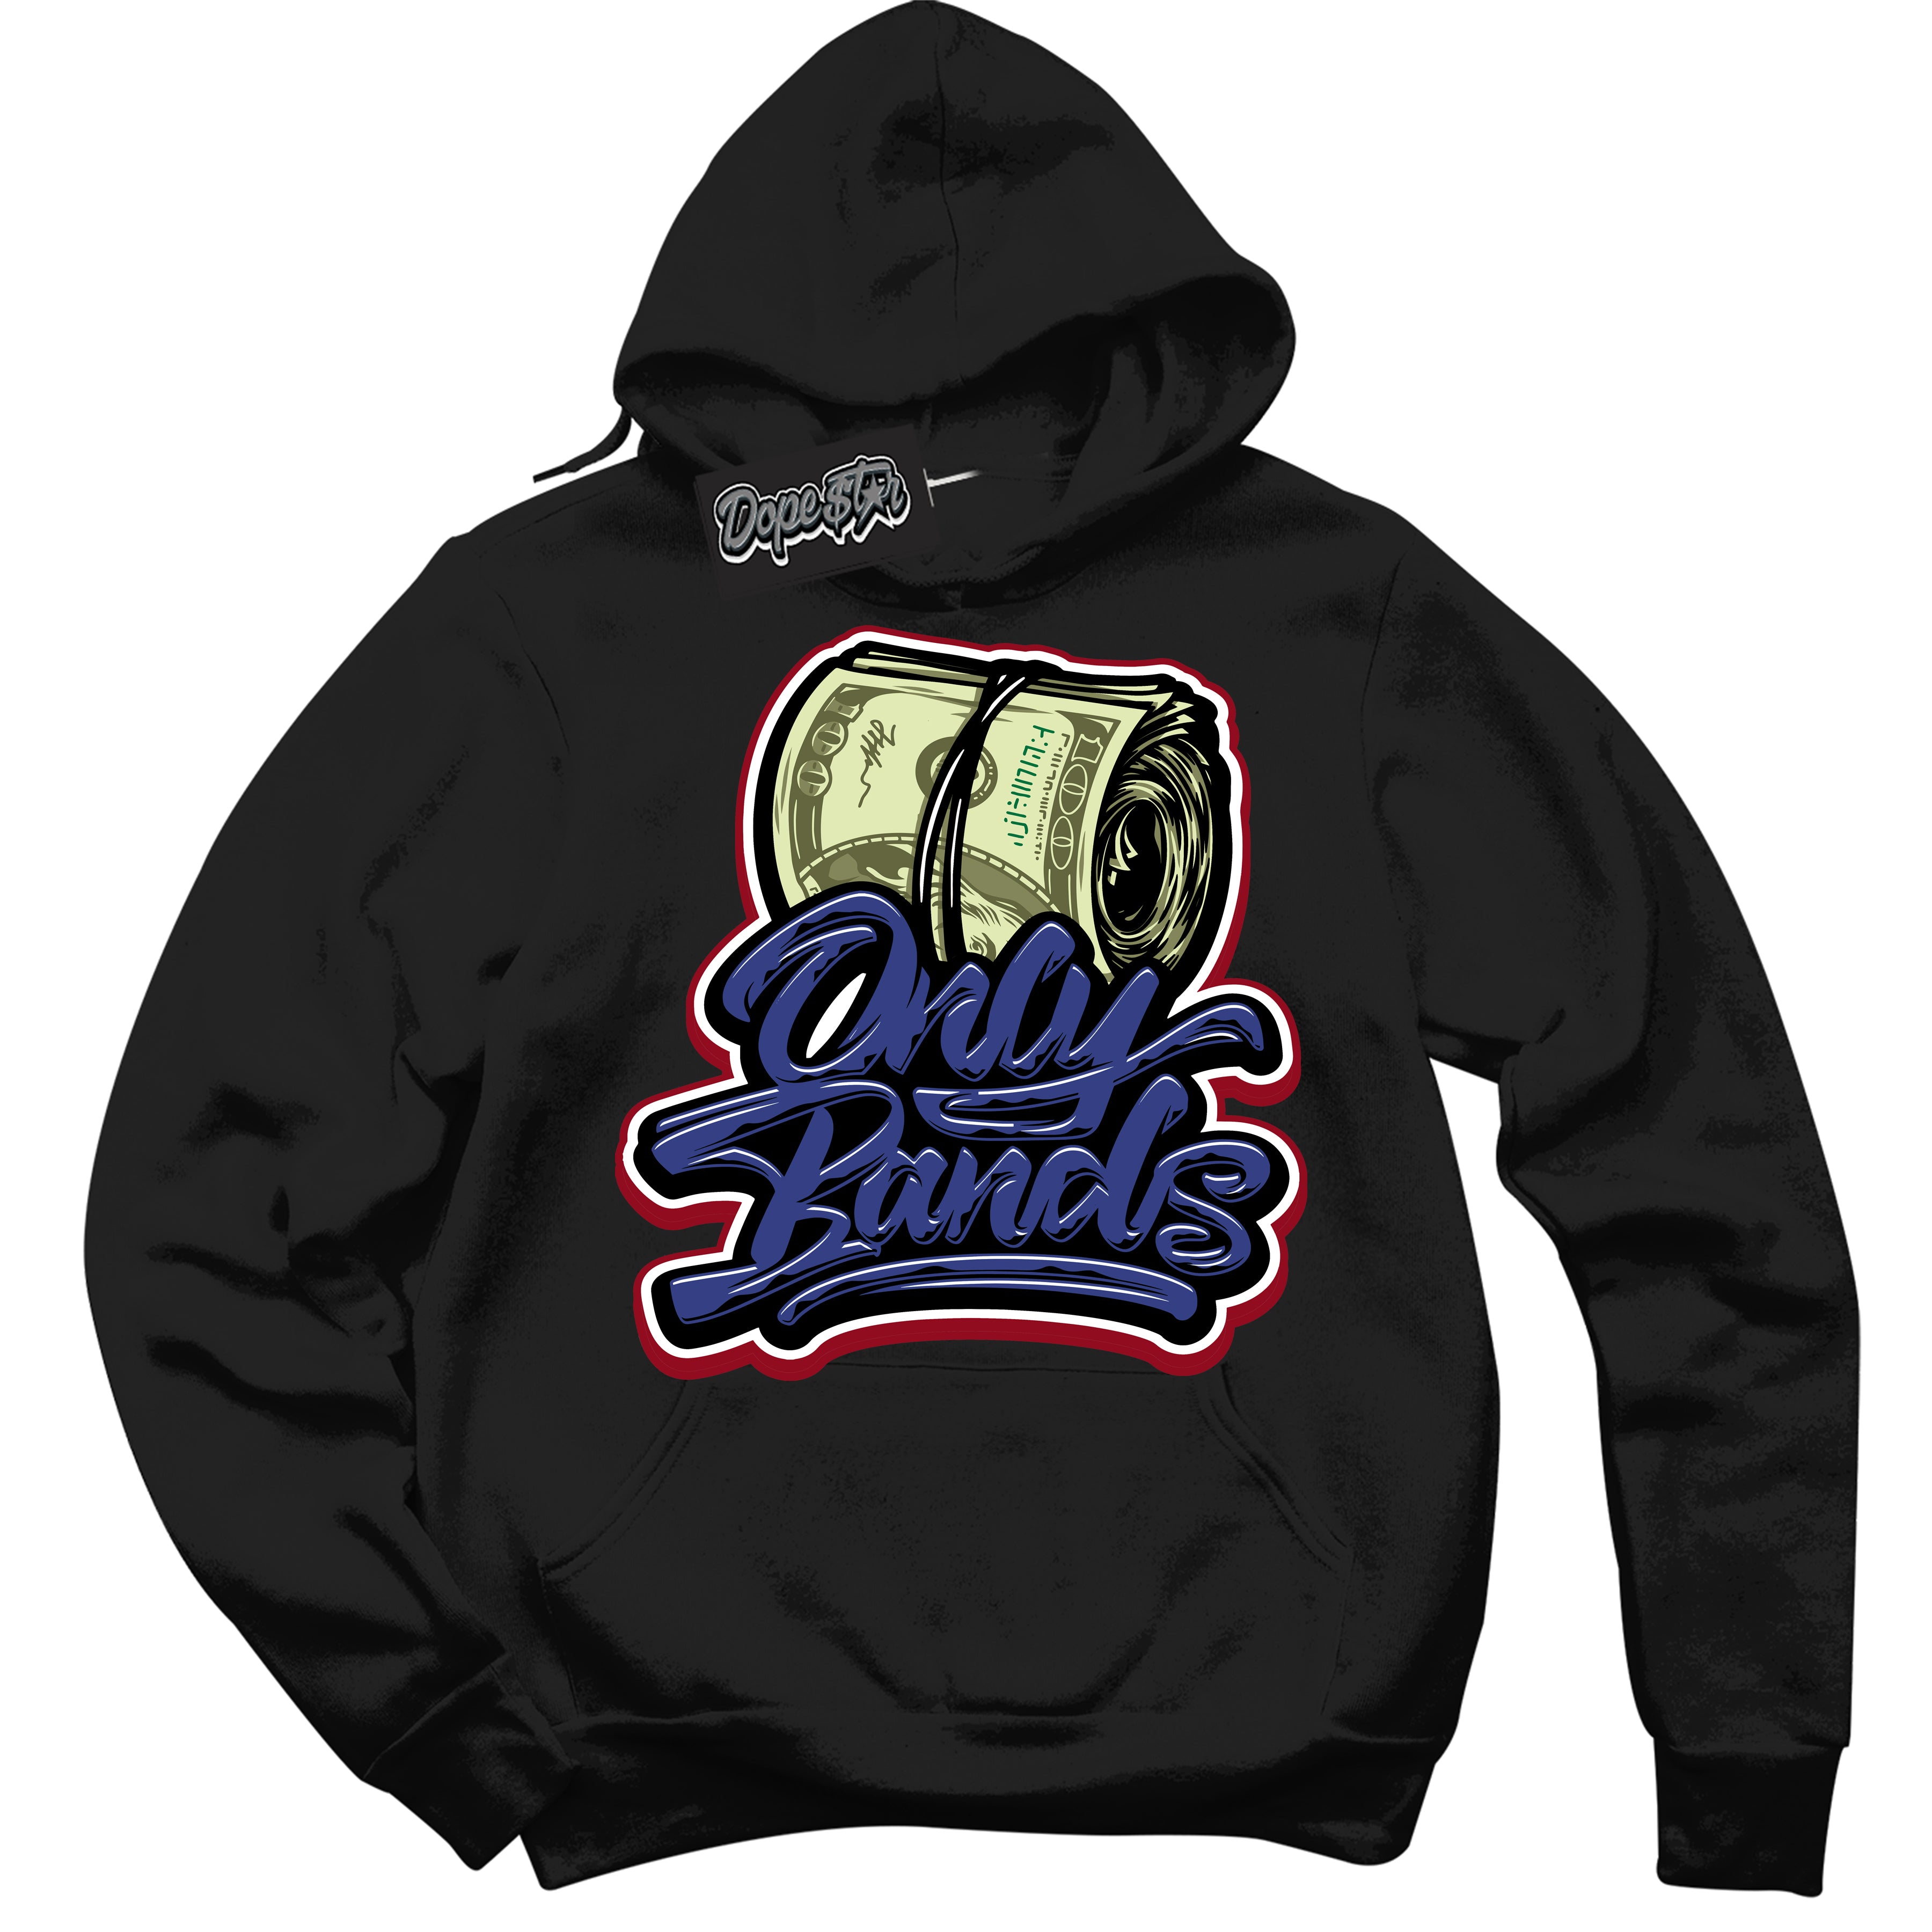 Cool Black Hoodie with “ Only Bands ”  design that Perfectly Matches Playoffs 8s Sneakers.